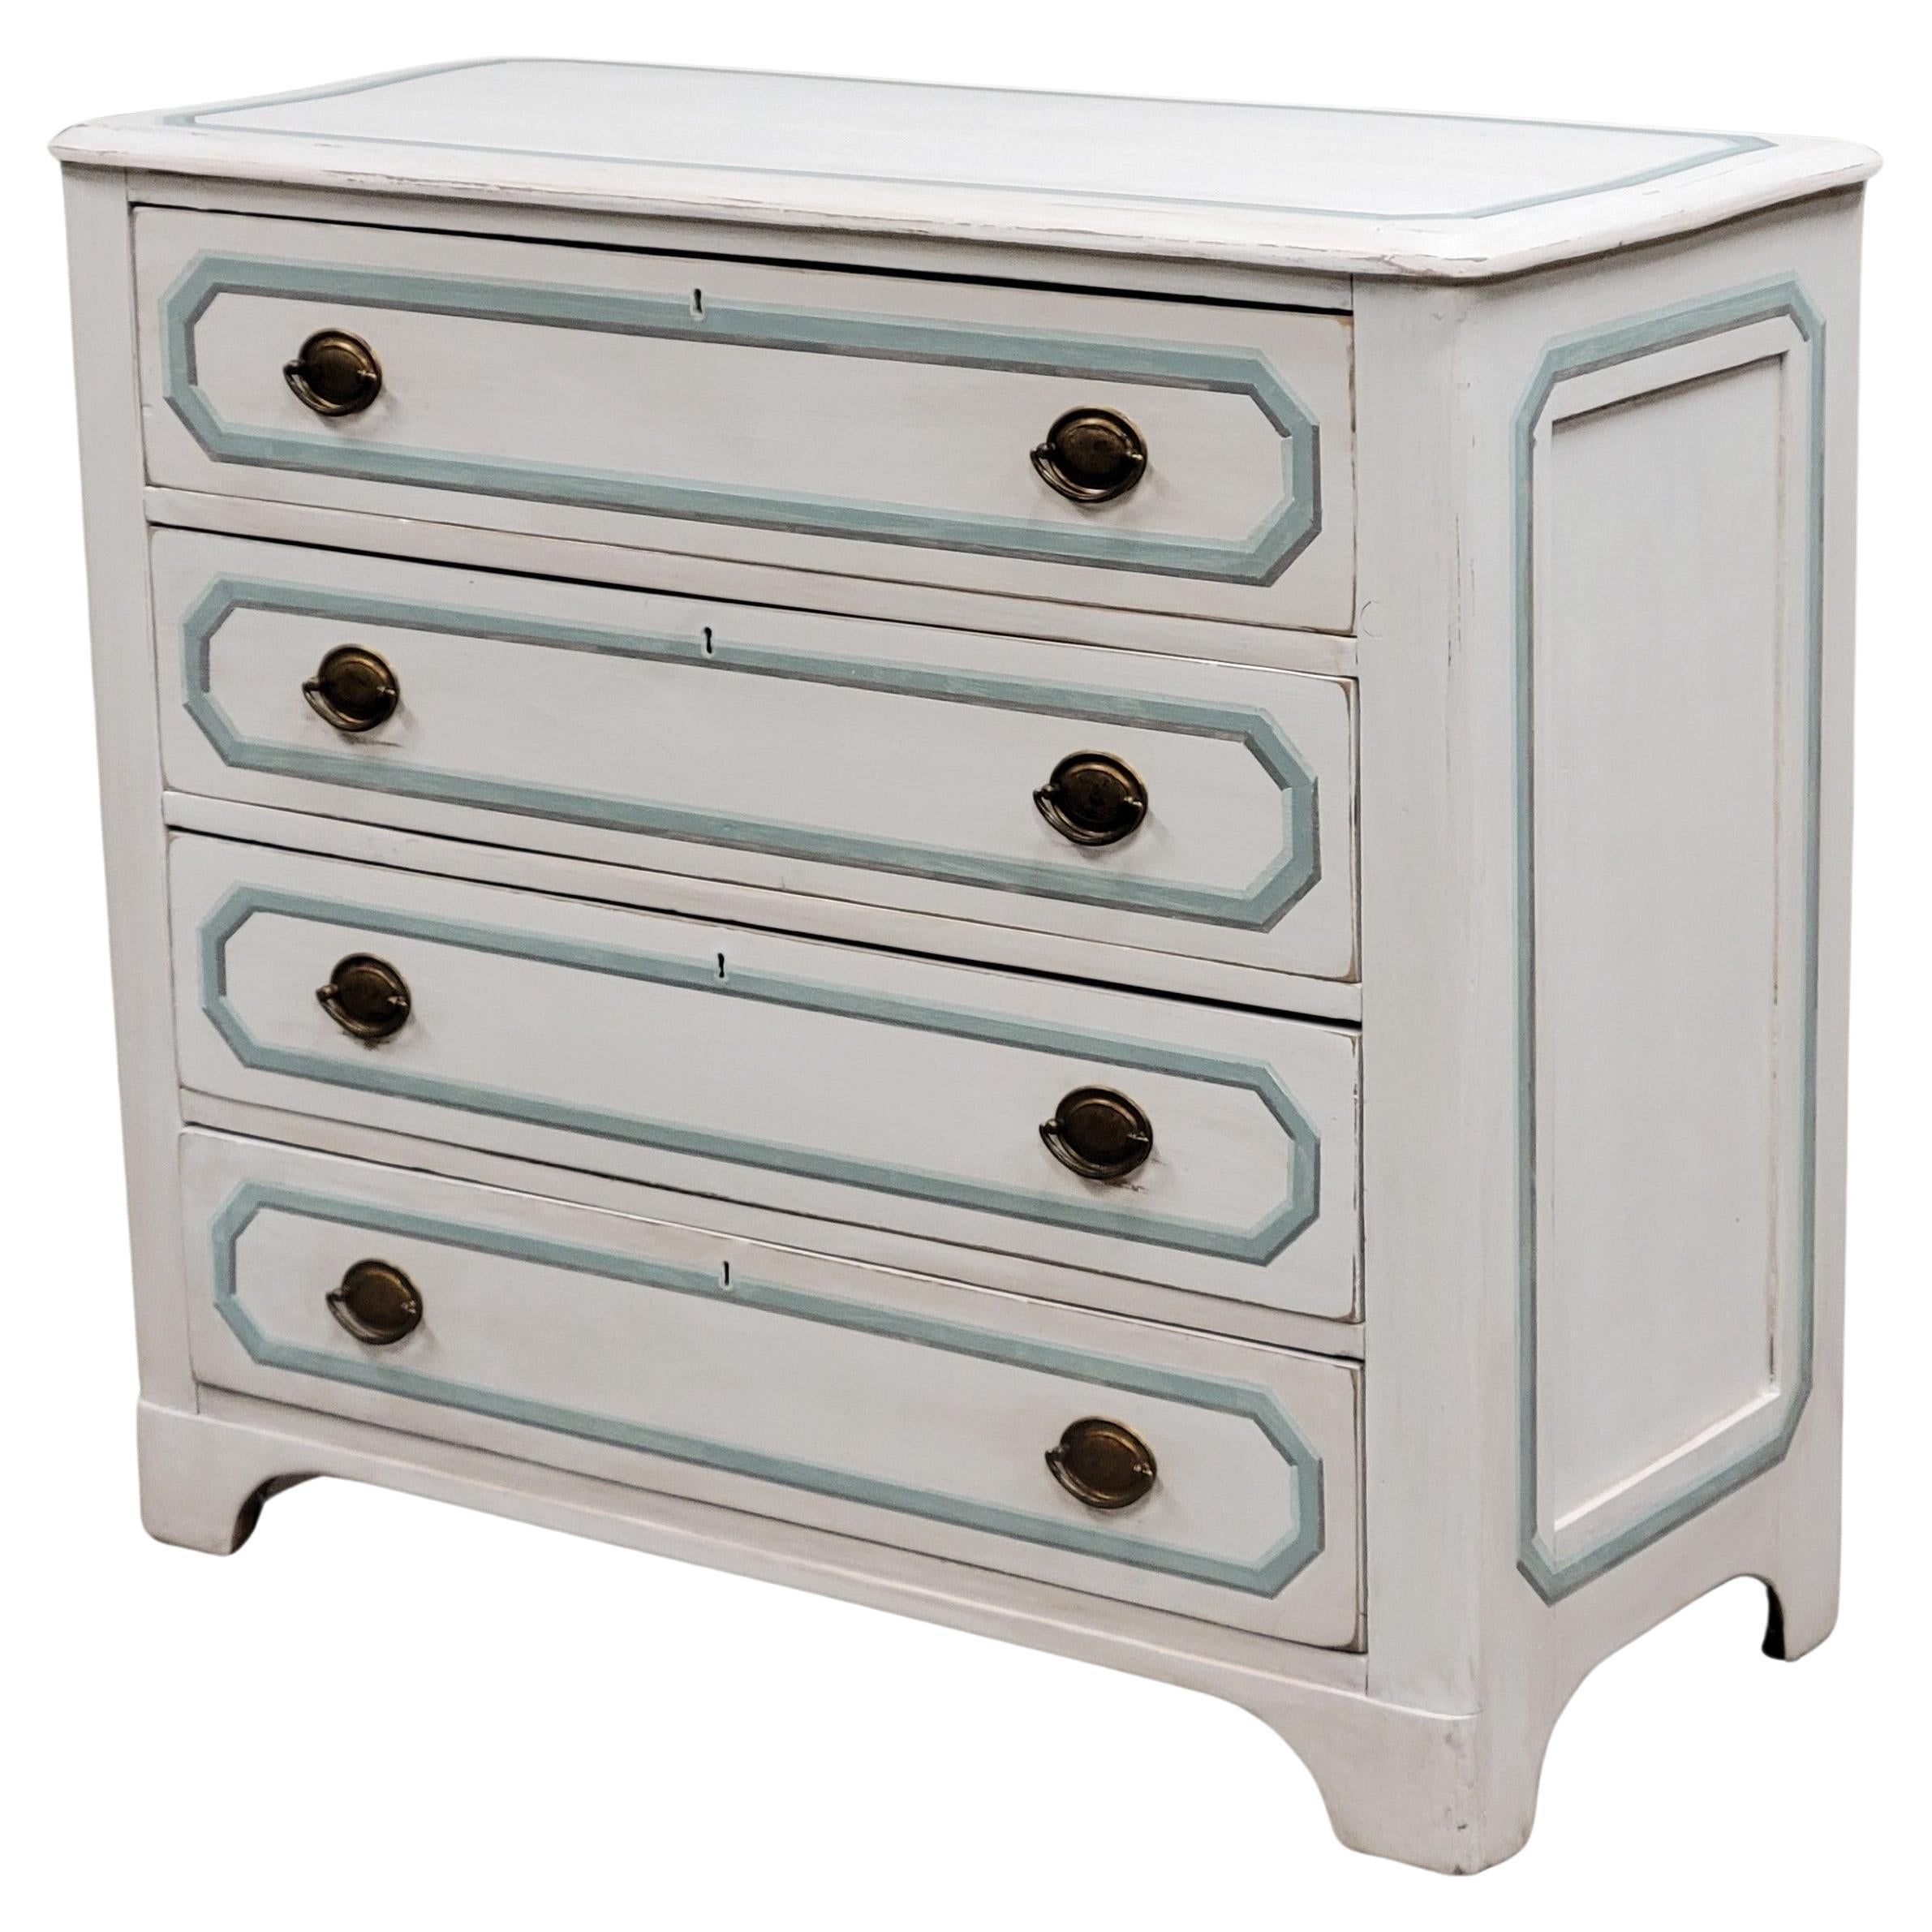 Antique Pine Dresser Painted White With Aqua and Gray Trompe l'Oiel French Line 